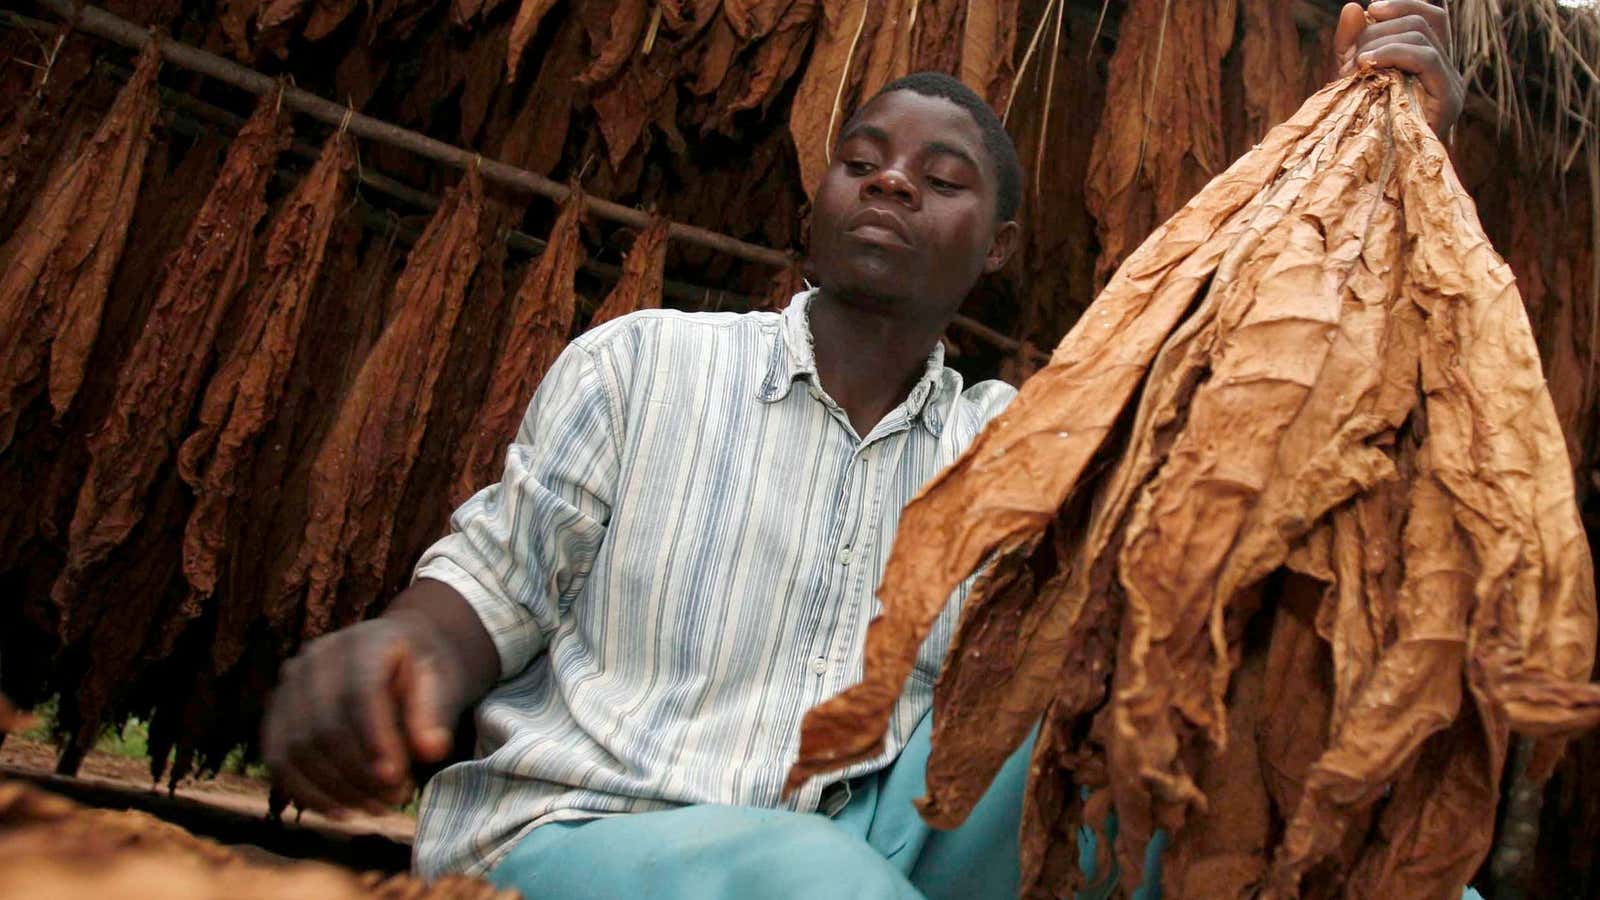 A Malawian works near a tobacco shed in Chalenga village, some 20km west of the capital Lilongwe